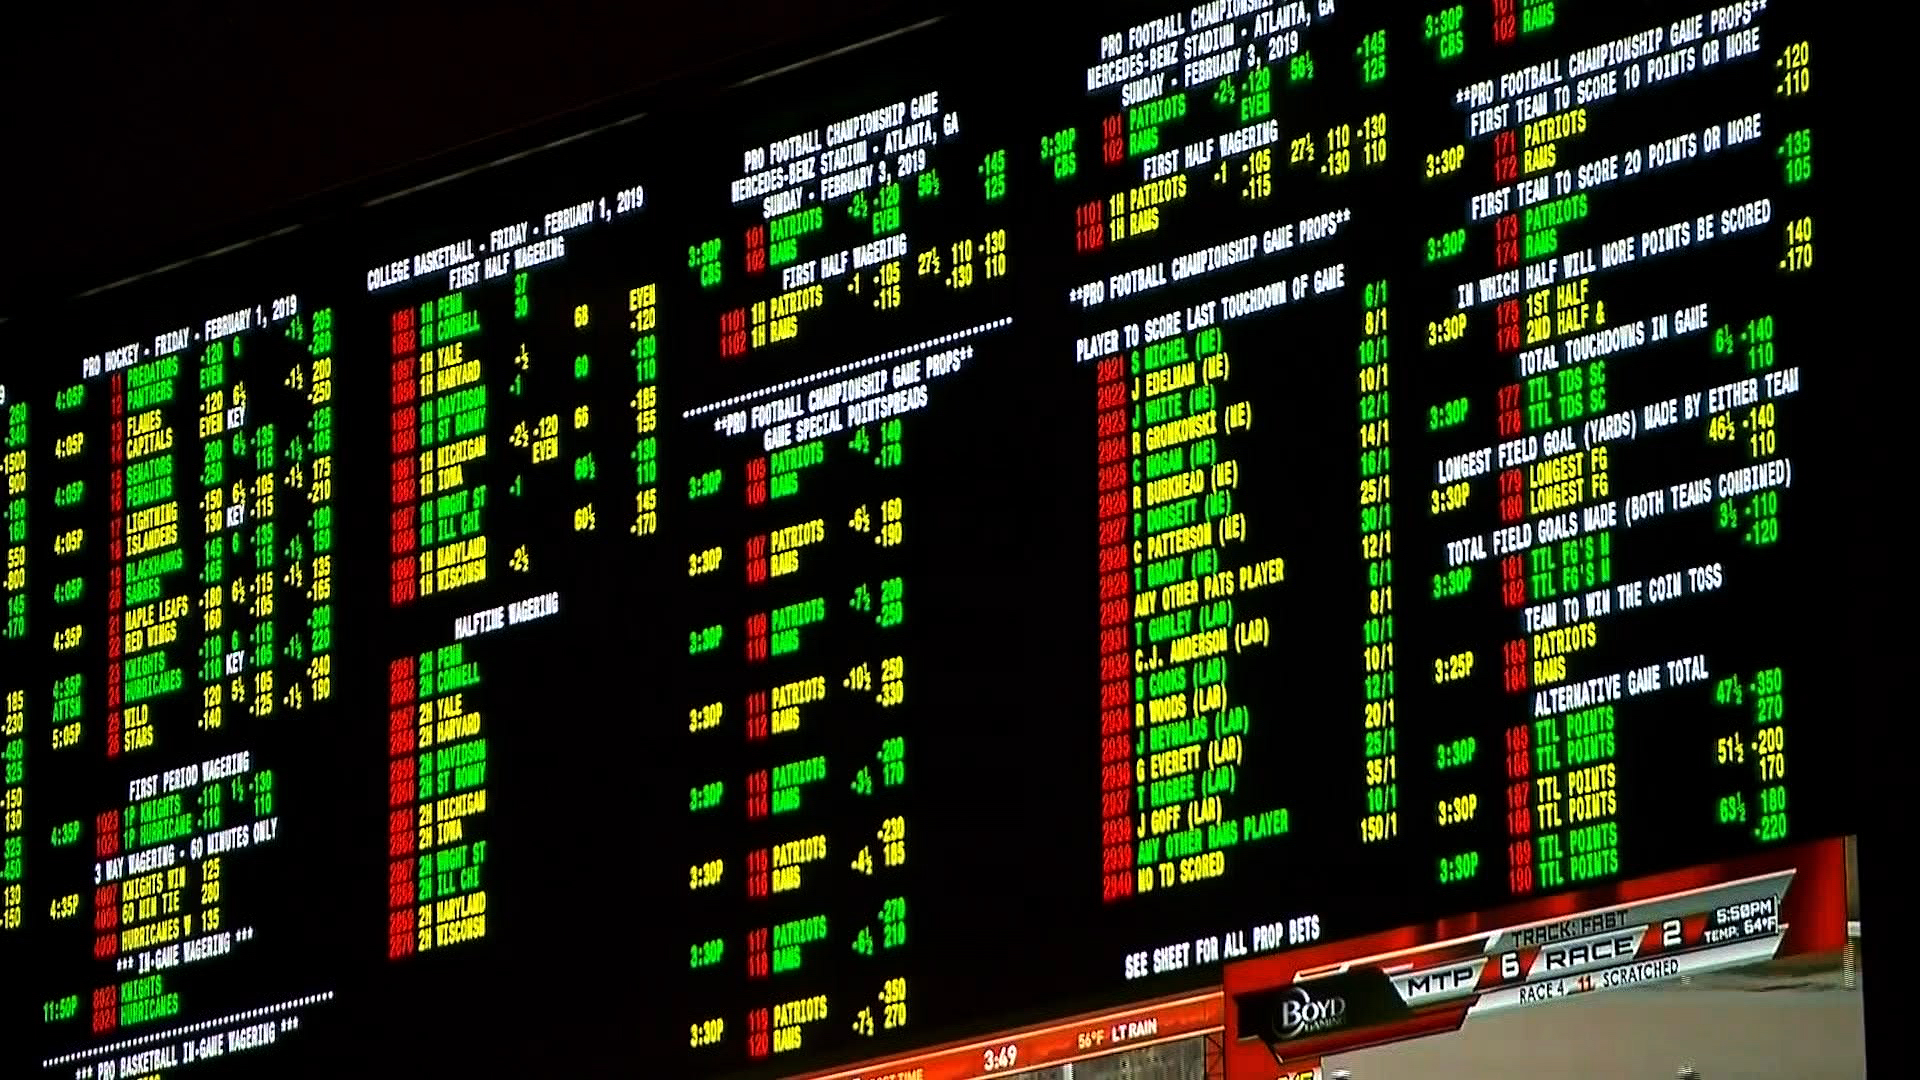    
Sports betting: 'None of us came in as experts'
